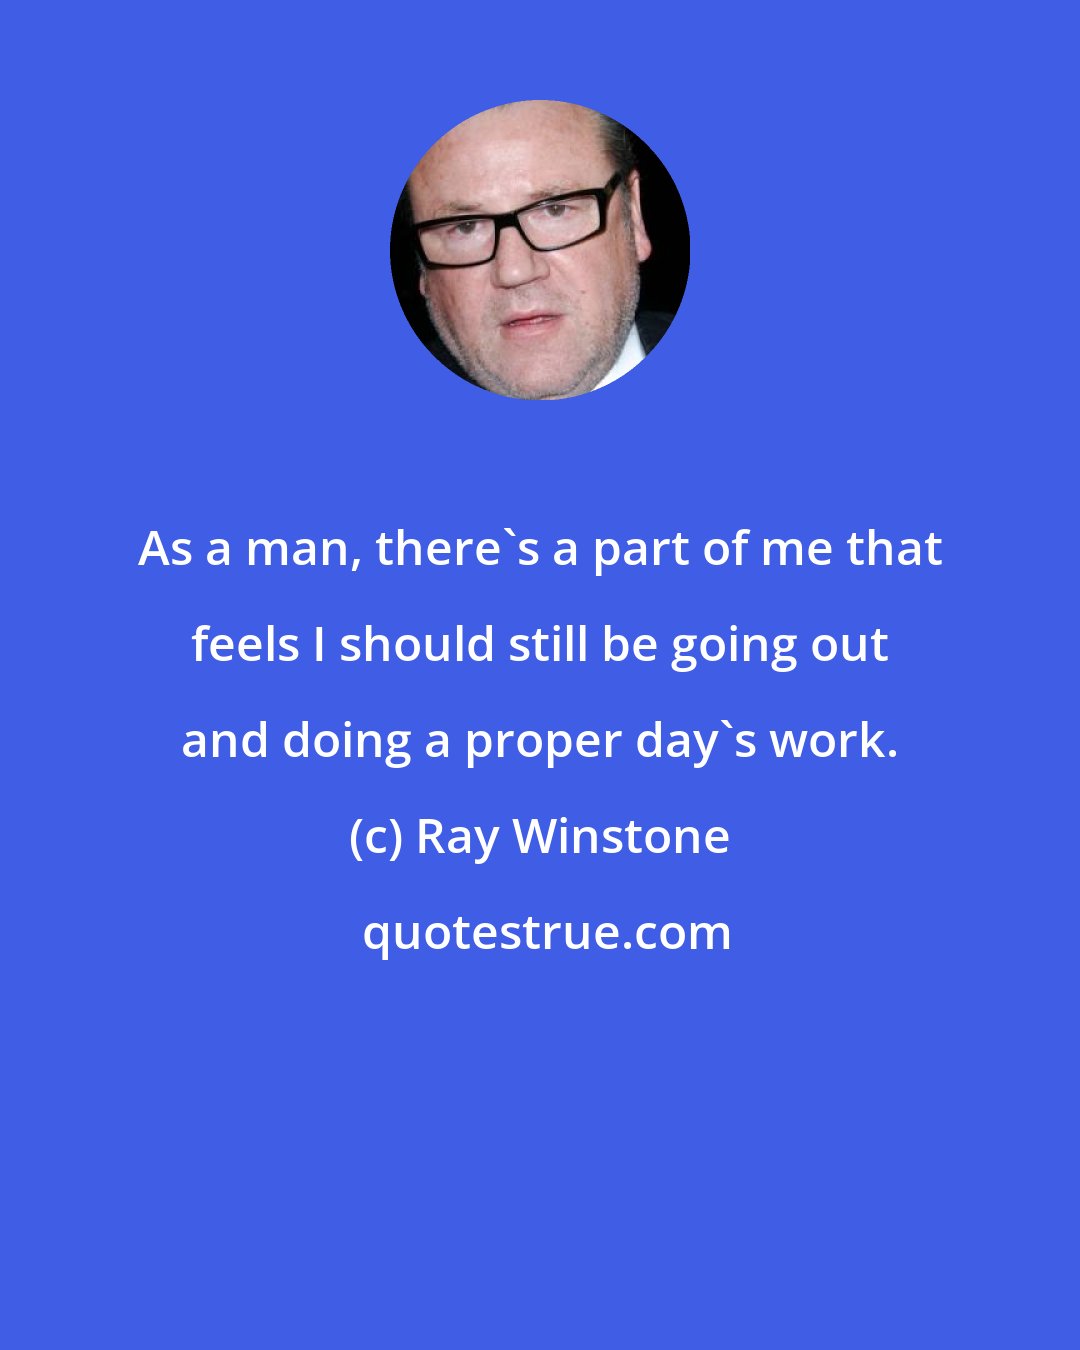 Ray Winstone: As a man, there's a part of me that feels I should still be going out and doing a proper day's work.